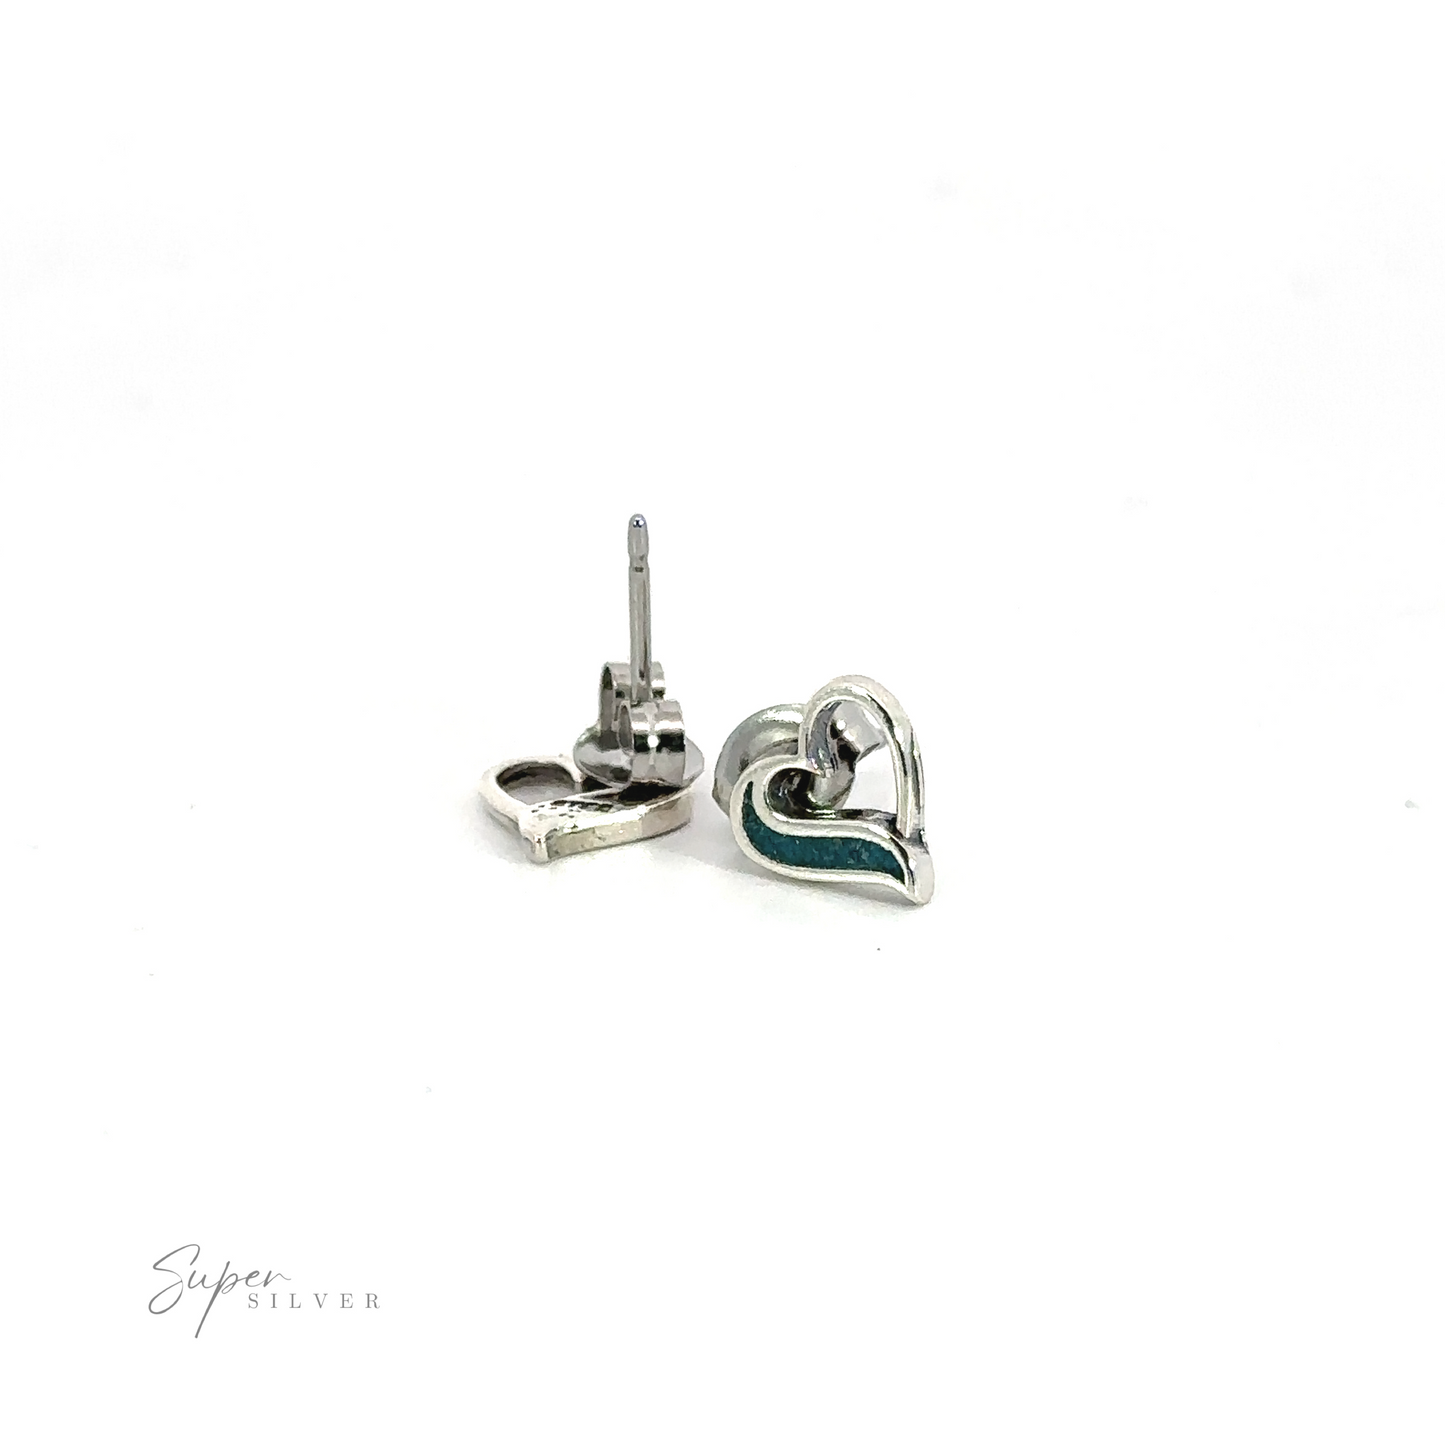 Turquoise Heart Outline Studs, made of .925 Sterling Silver, with turquoise accents on a white background.